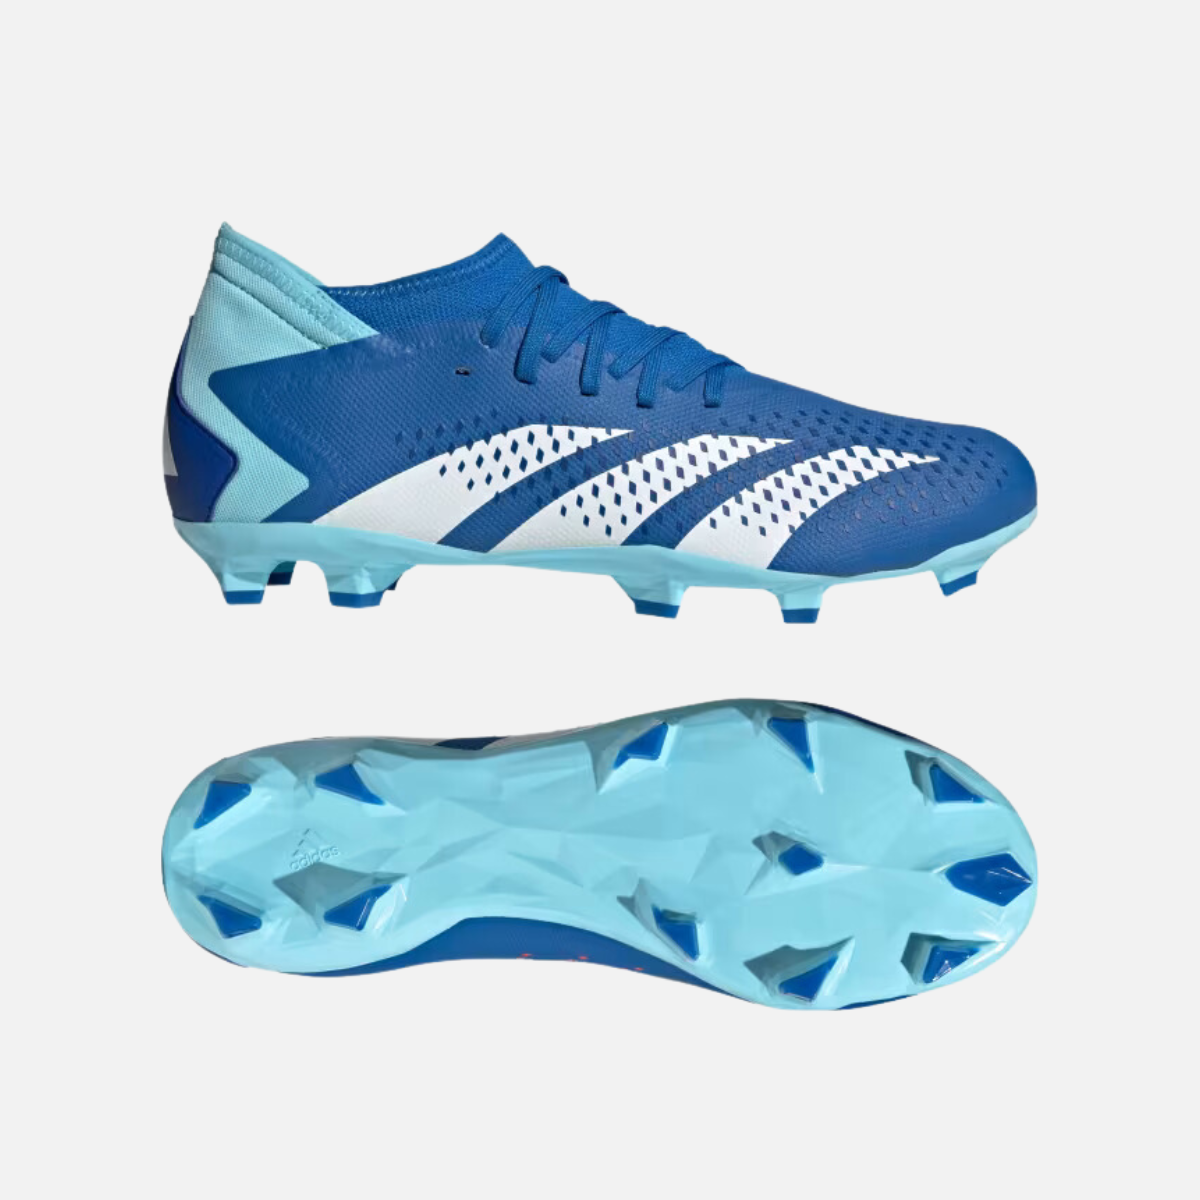 Adidas Predator Accuracy.3 Firm Ground Football Boots -Bright Royal/Cloud White/Bliss Blue